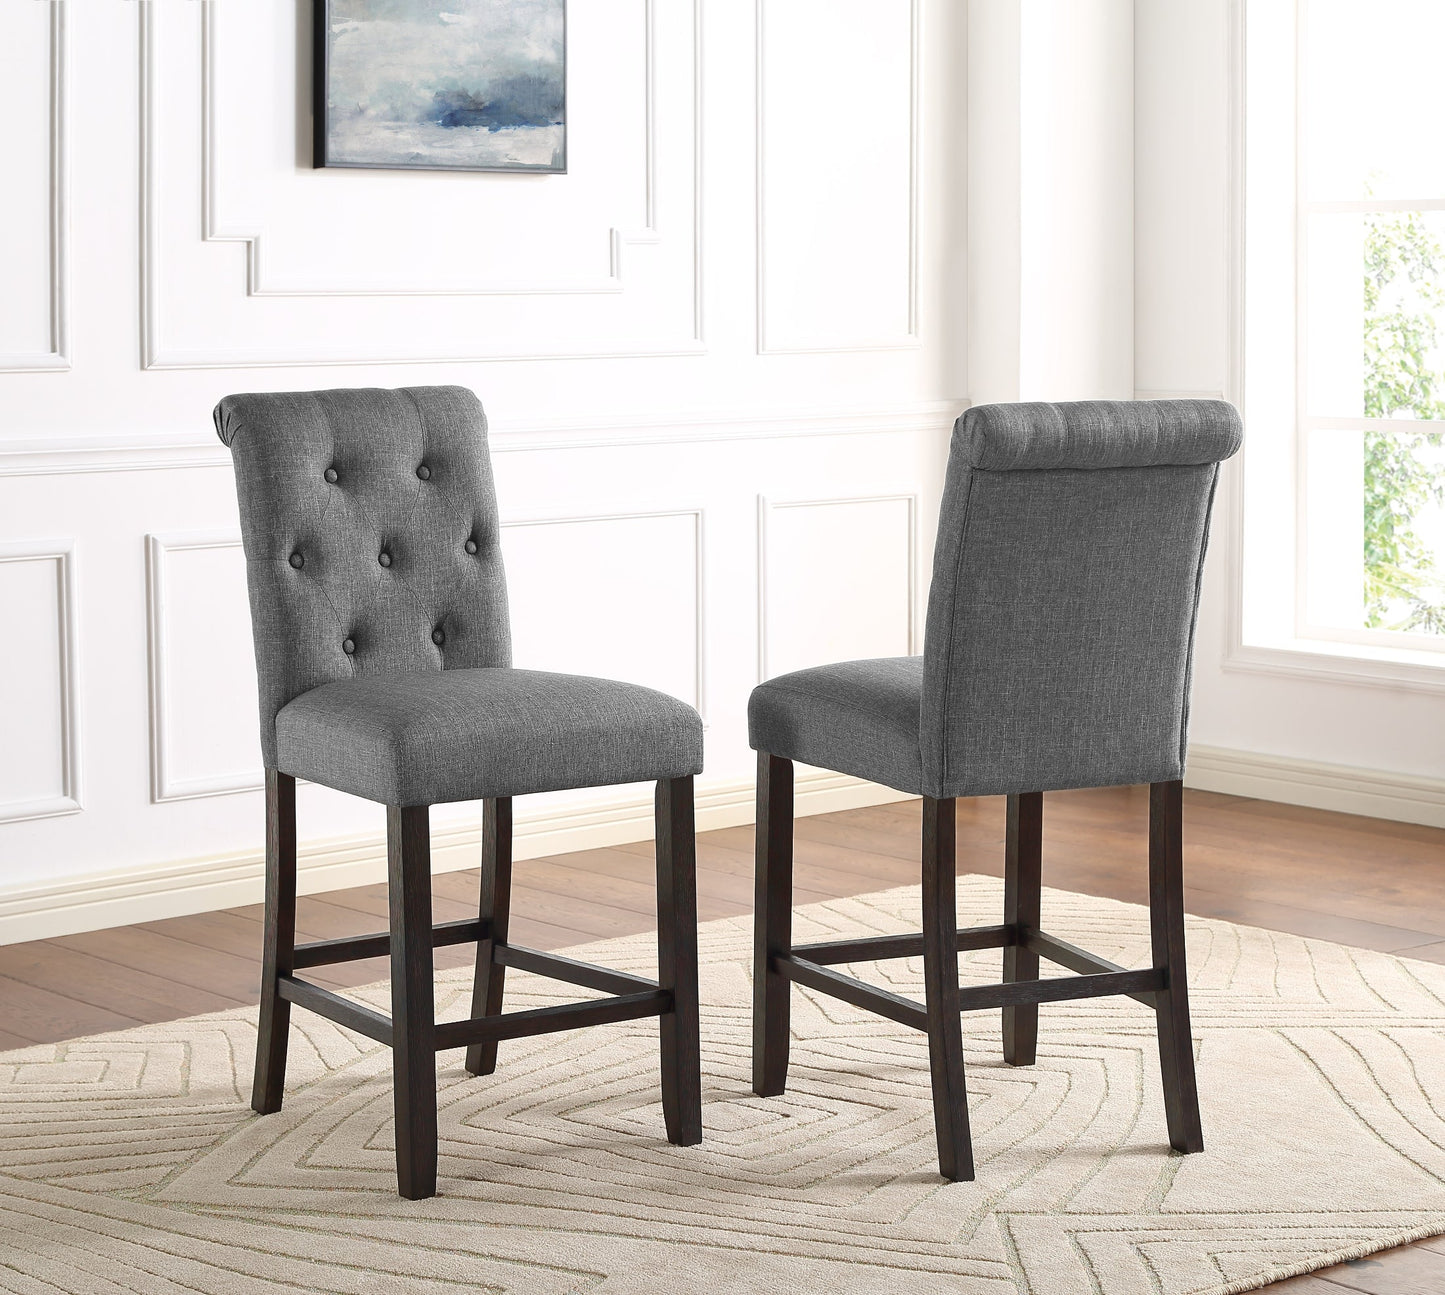 Leviton Solid Wood Tufted Asons Counter Height Stool, Set of 2, Grey